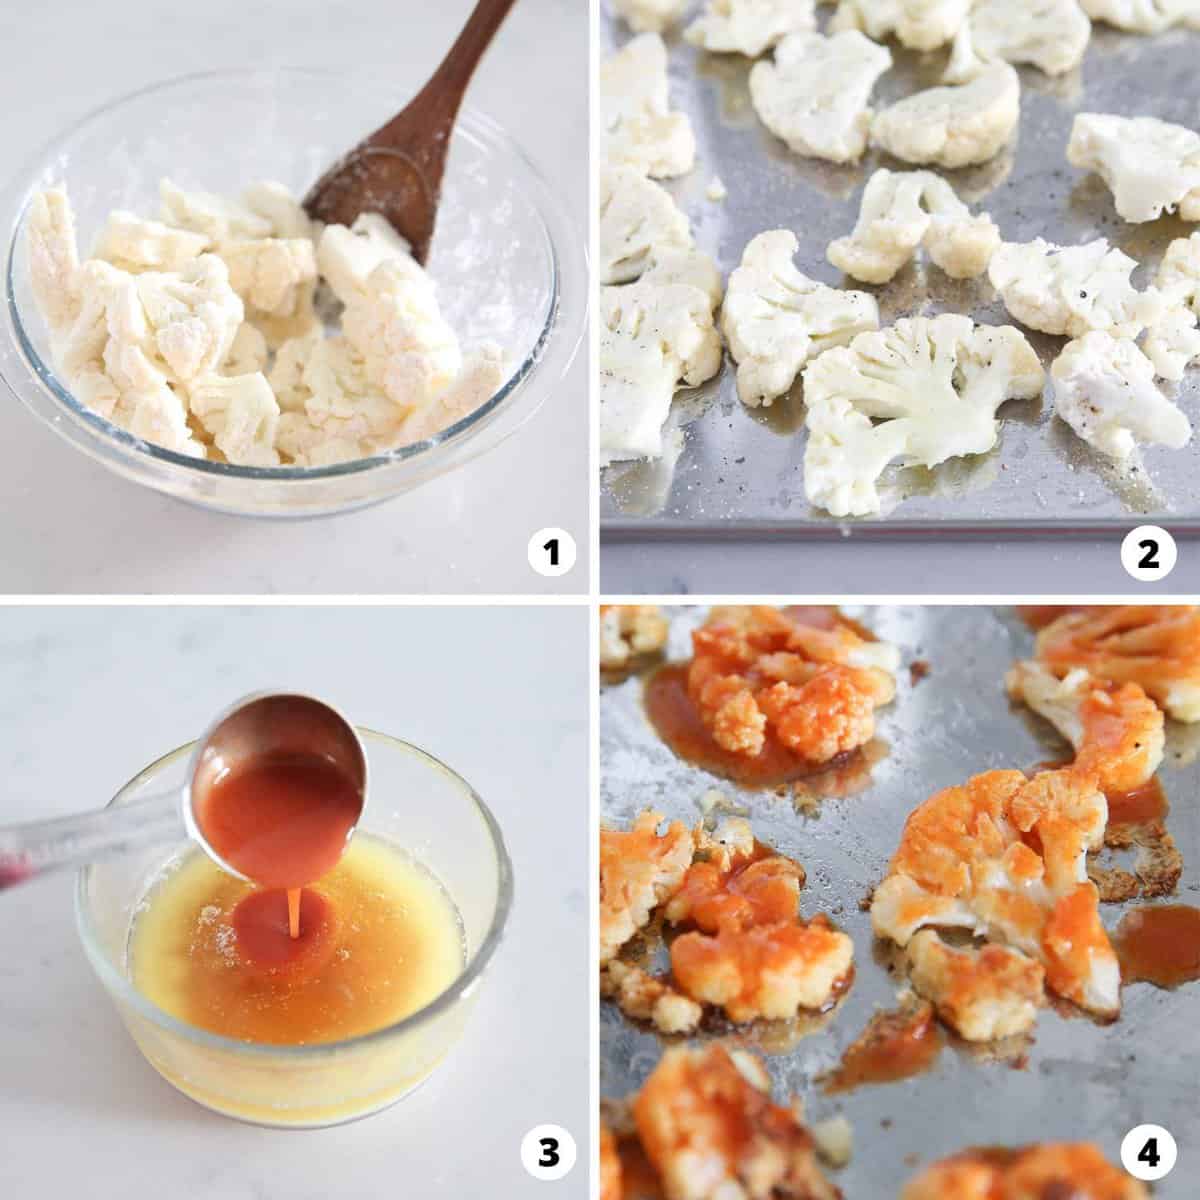 Showing how to make buffalo cauliflower in a 4 step collage.